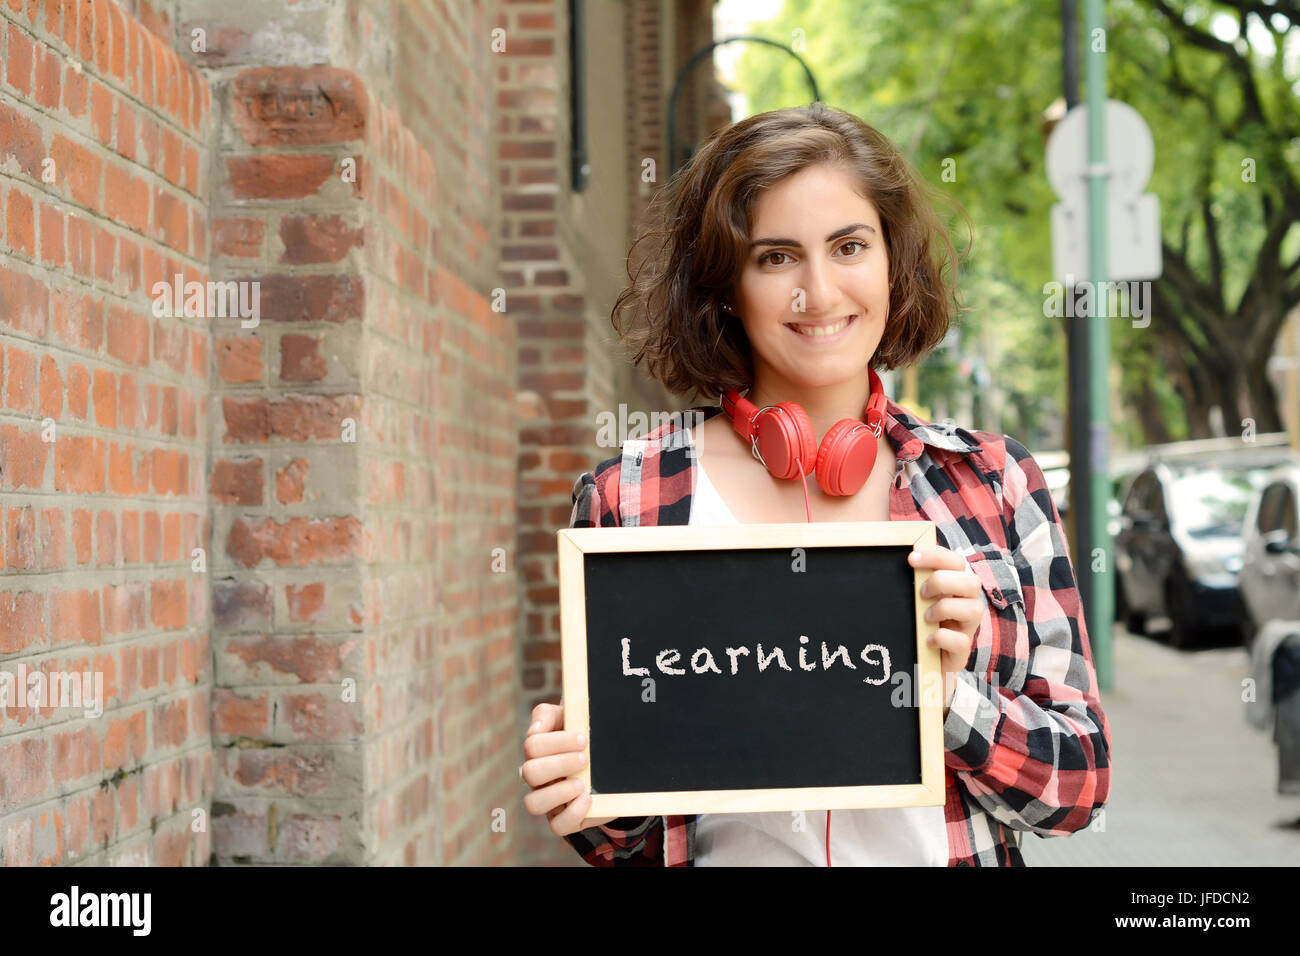 Young beautiful woman holding chalkboard with text 'Learning'. Education concept. Outdoors. Stock Photo